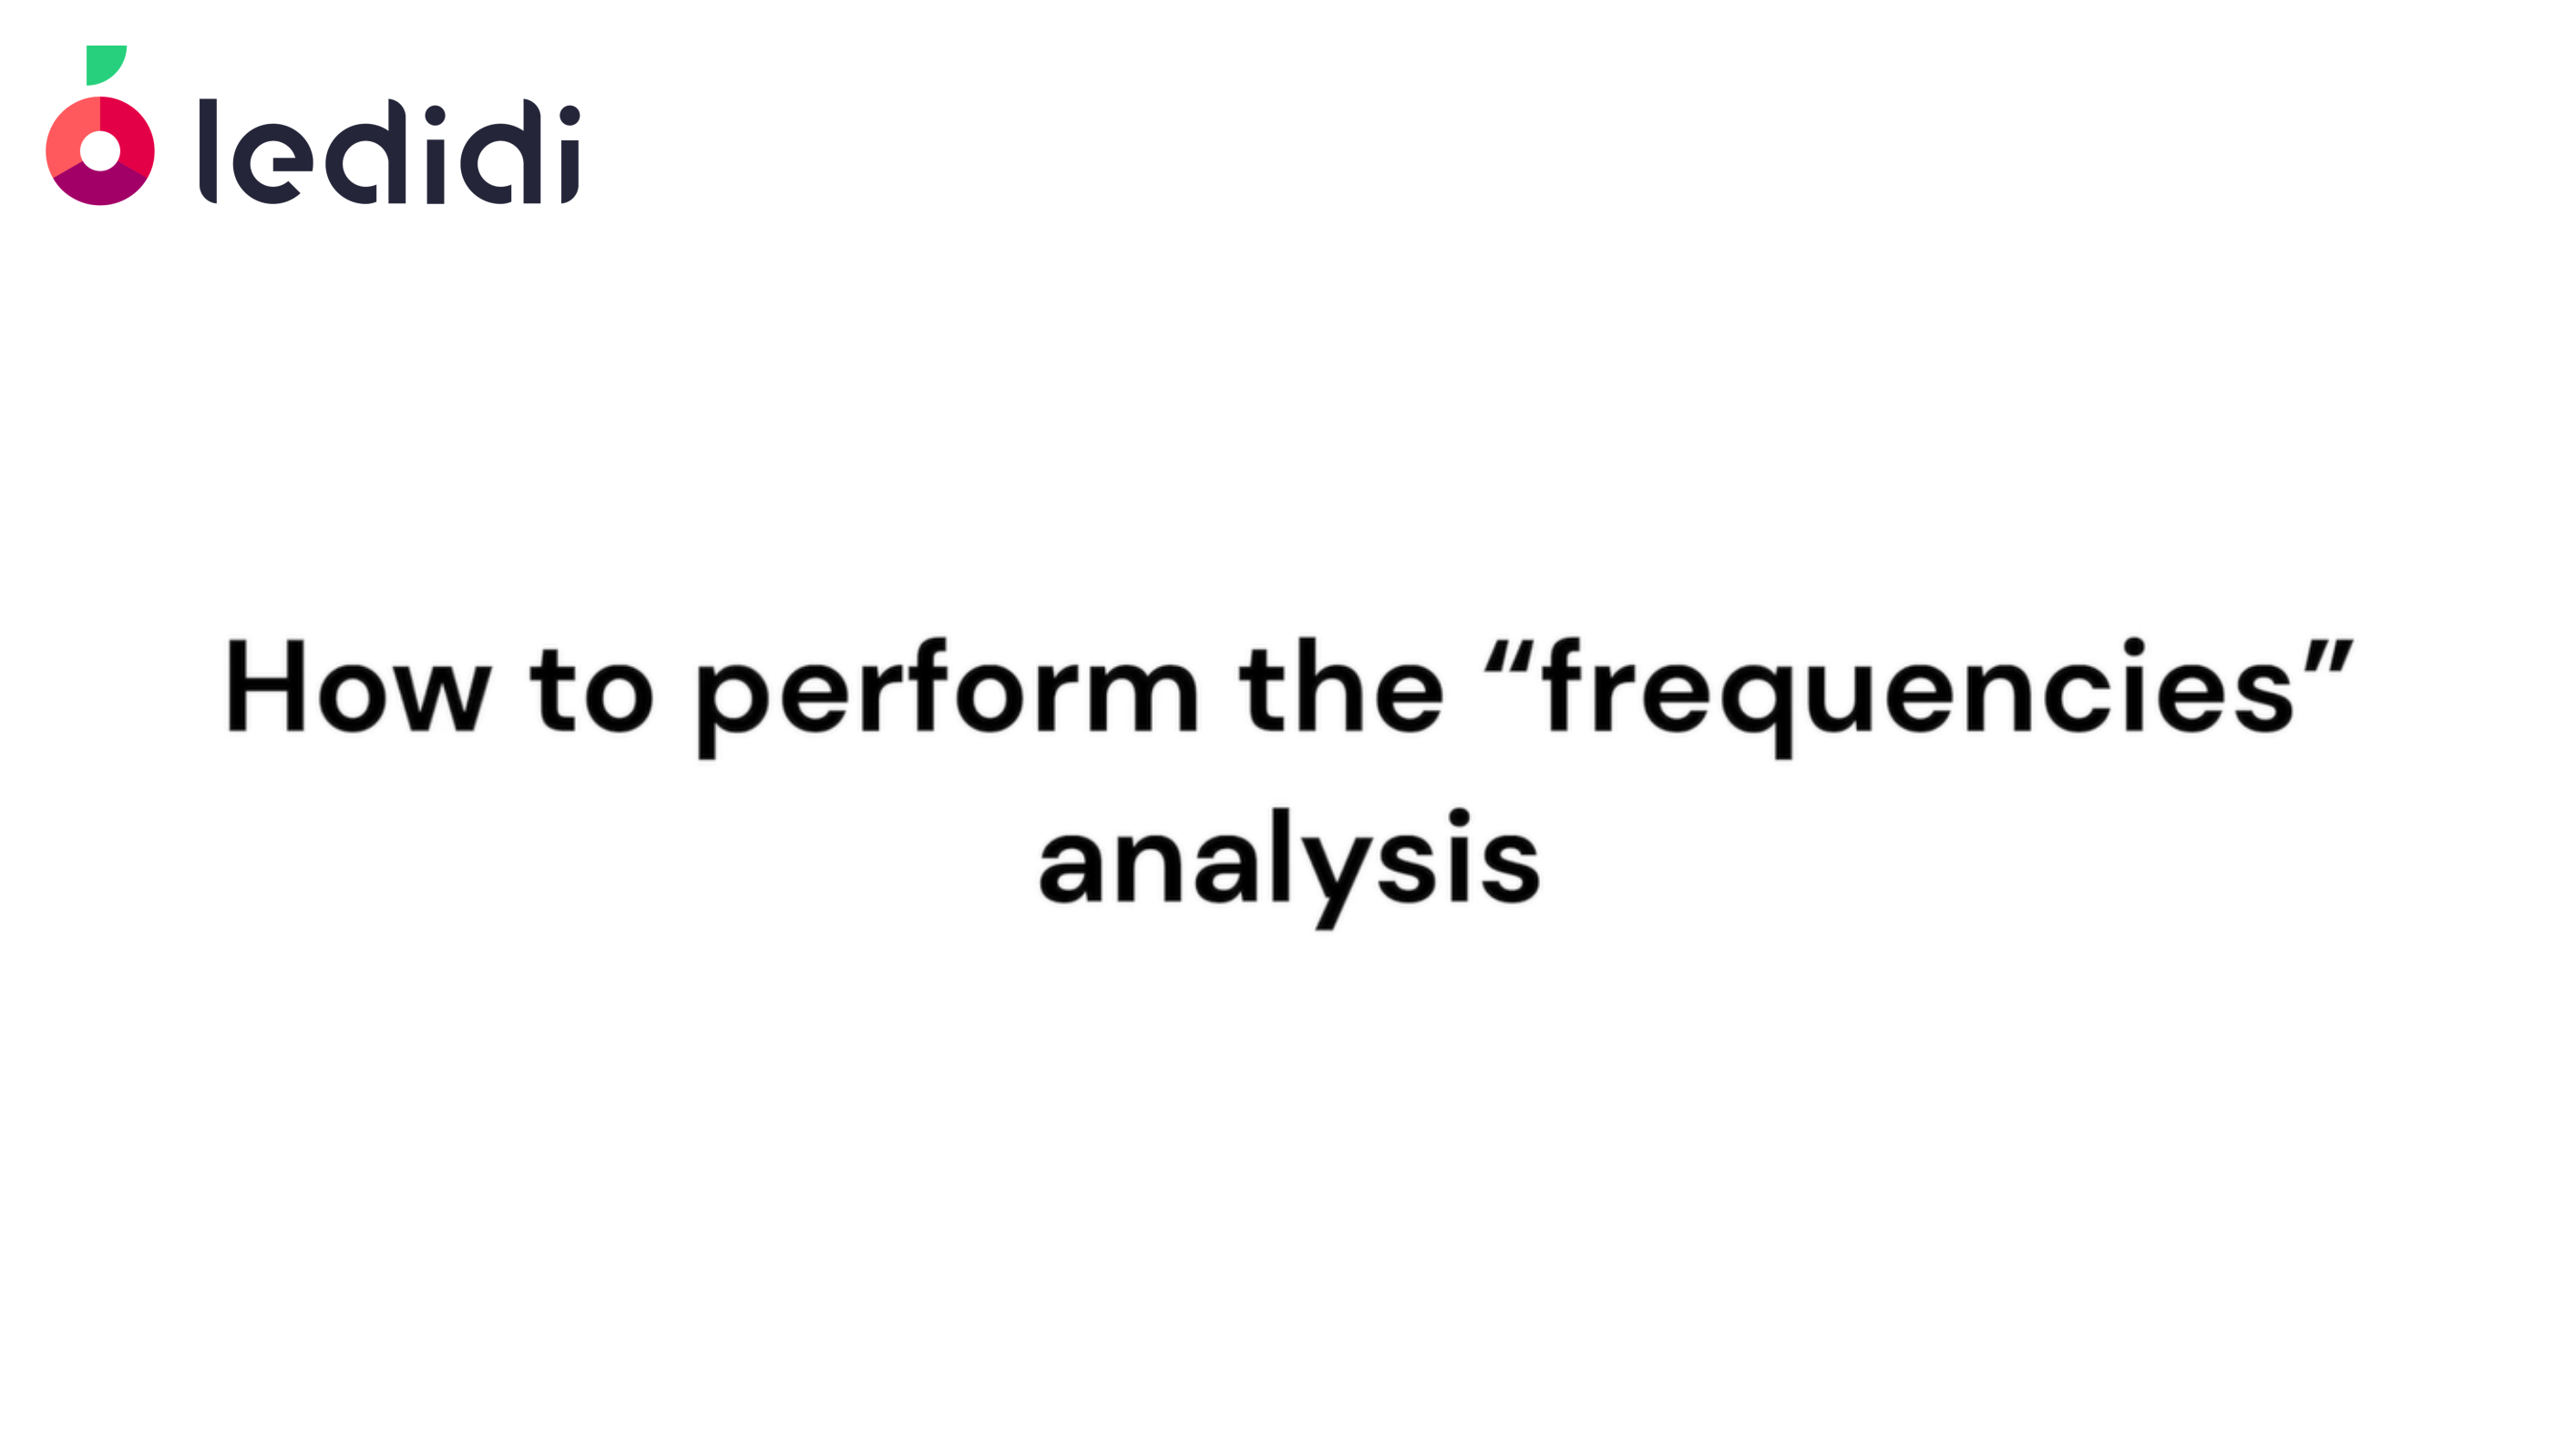 How to perform the "Frequencies" analysis